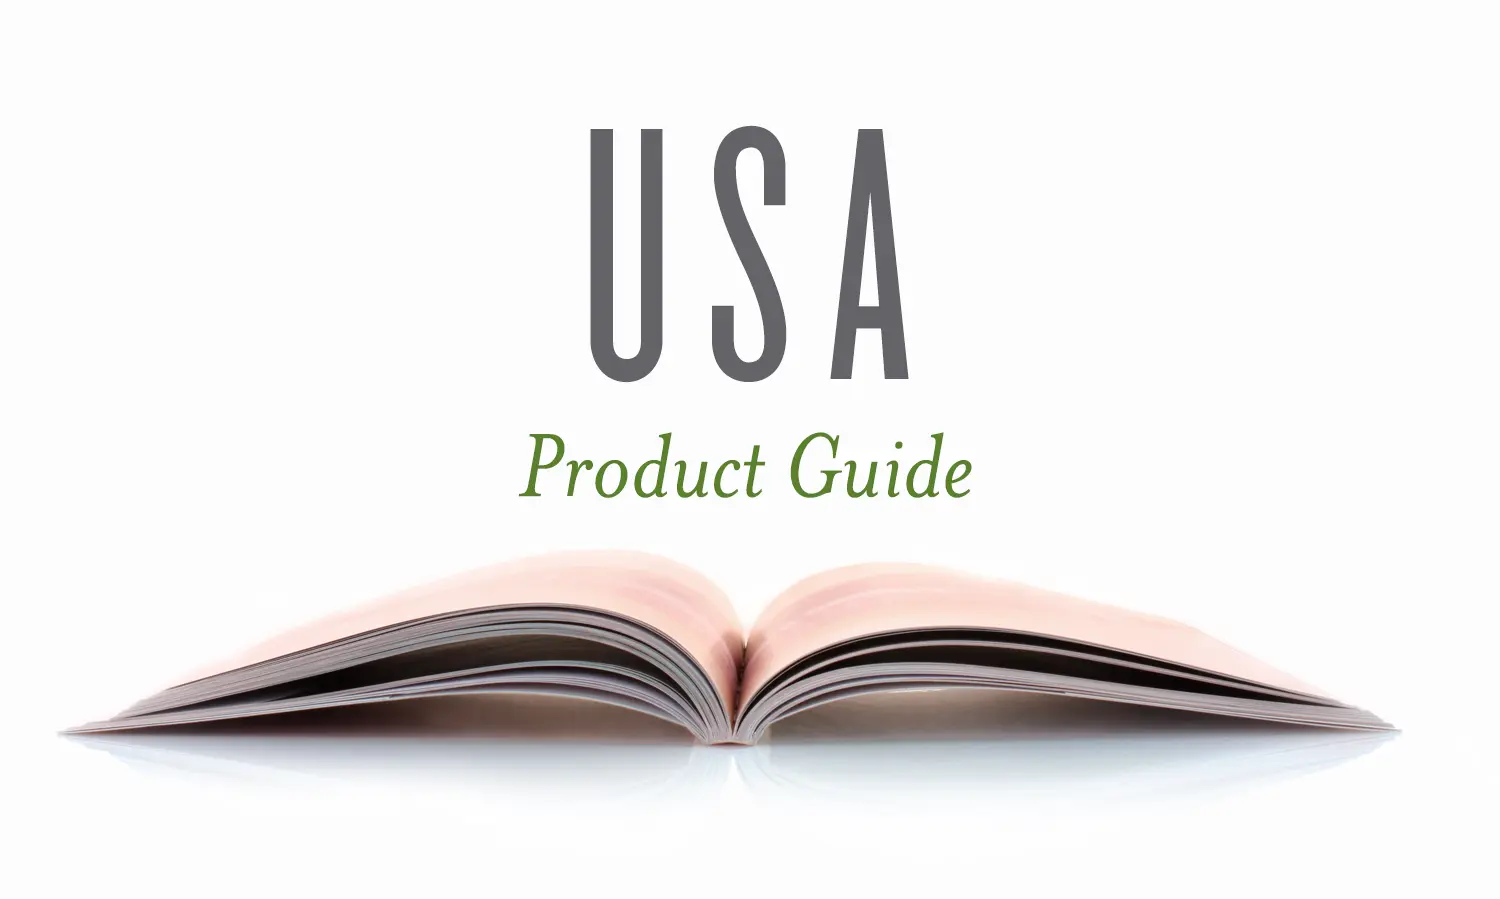 USA Product Guide